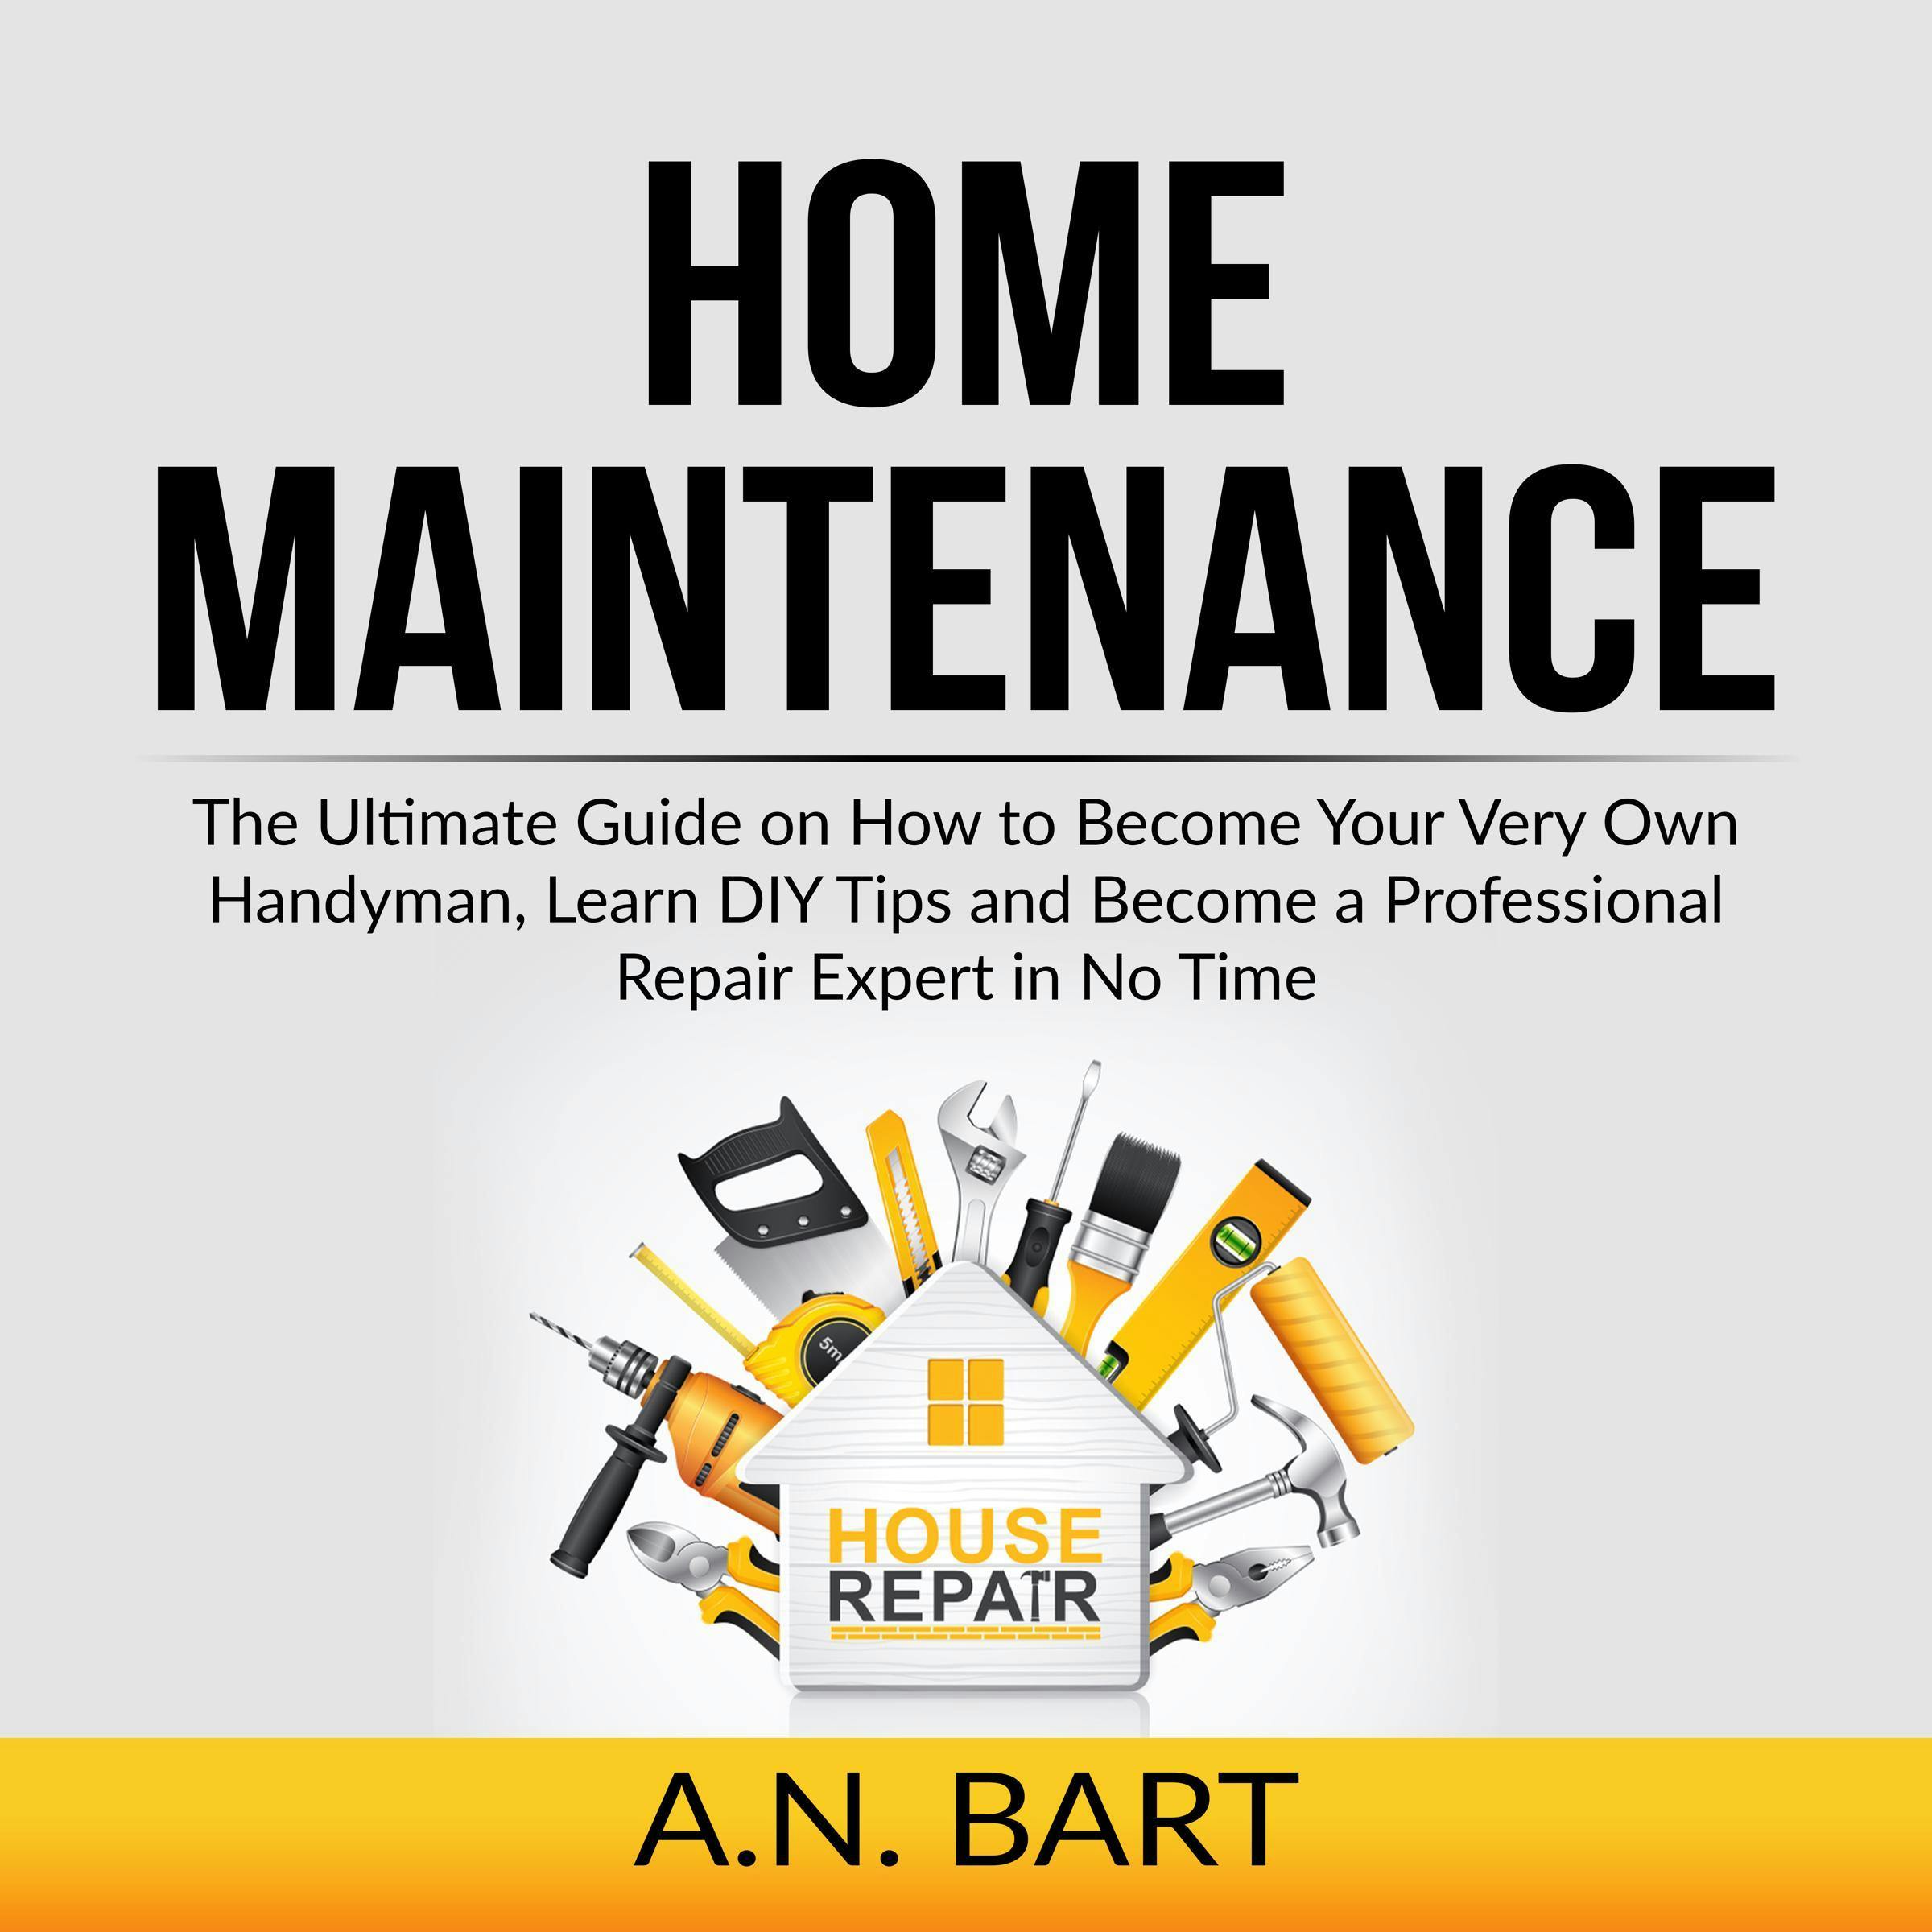 Home Maintenance: The Ultimate Guide on How to Become Your Very Own Handyman, Learn DIY Tips and Become a Professional Repair Expert in No Time - A.N. Bart